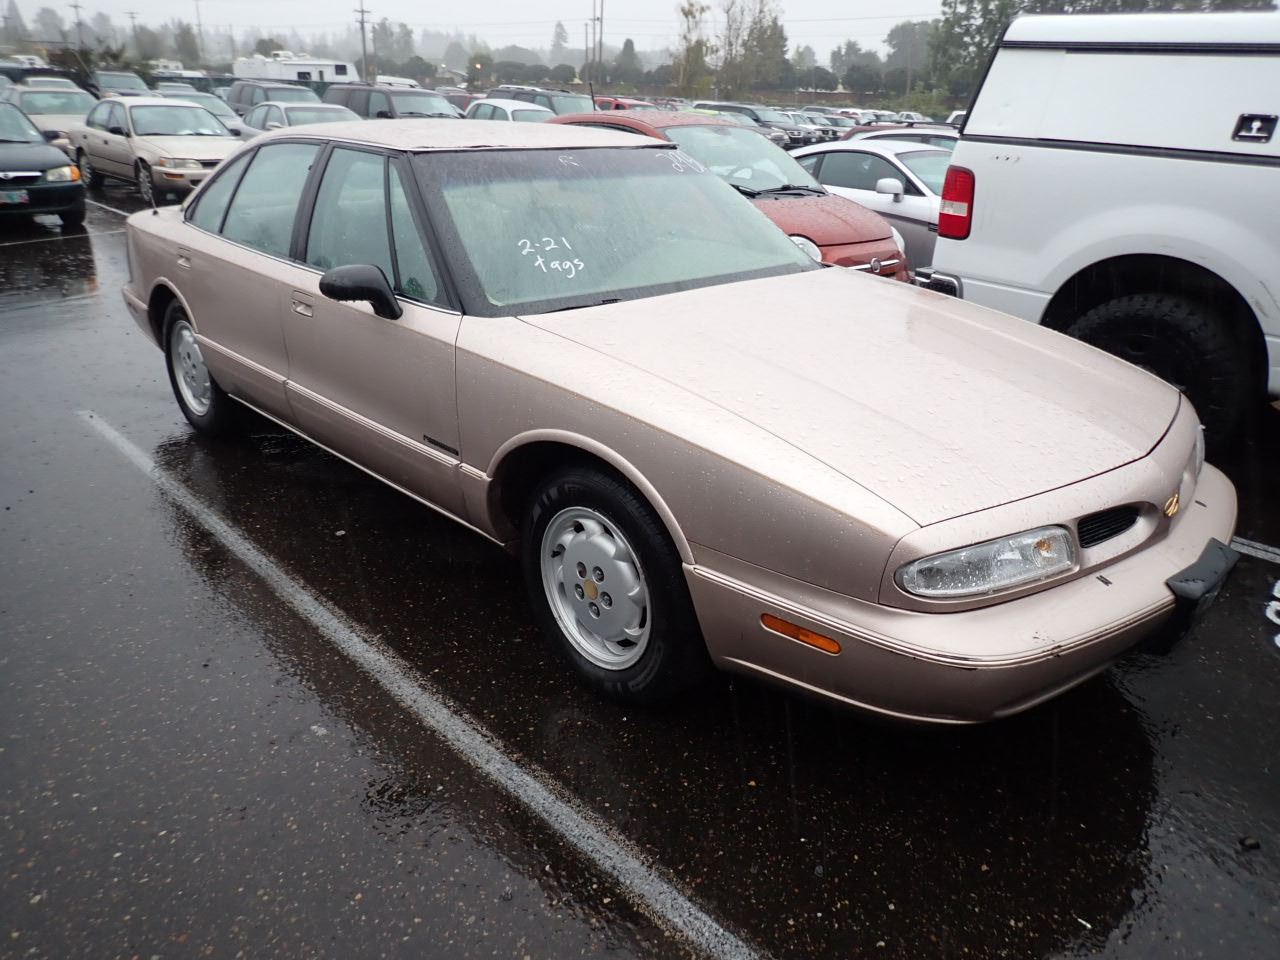 1999 Oldsmobile 88, the official car of poorly installed aftermarket chrome  trim and DIYed whitewalls : r/regularcarreviews